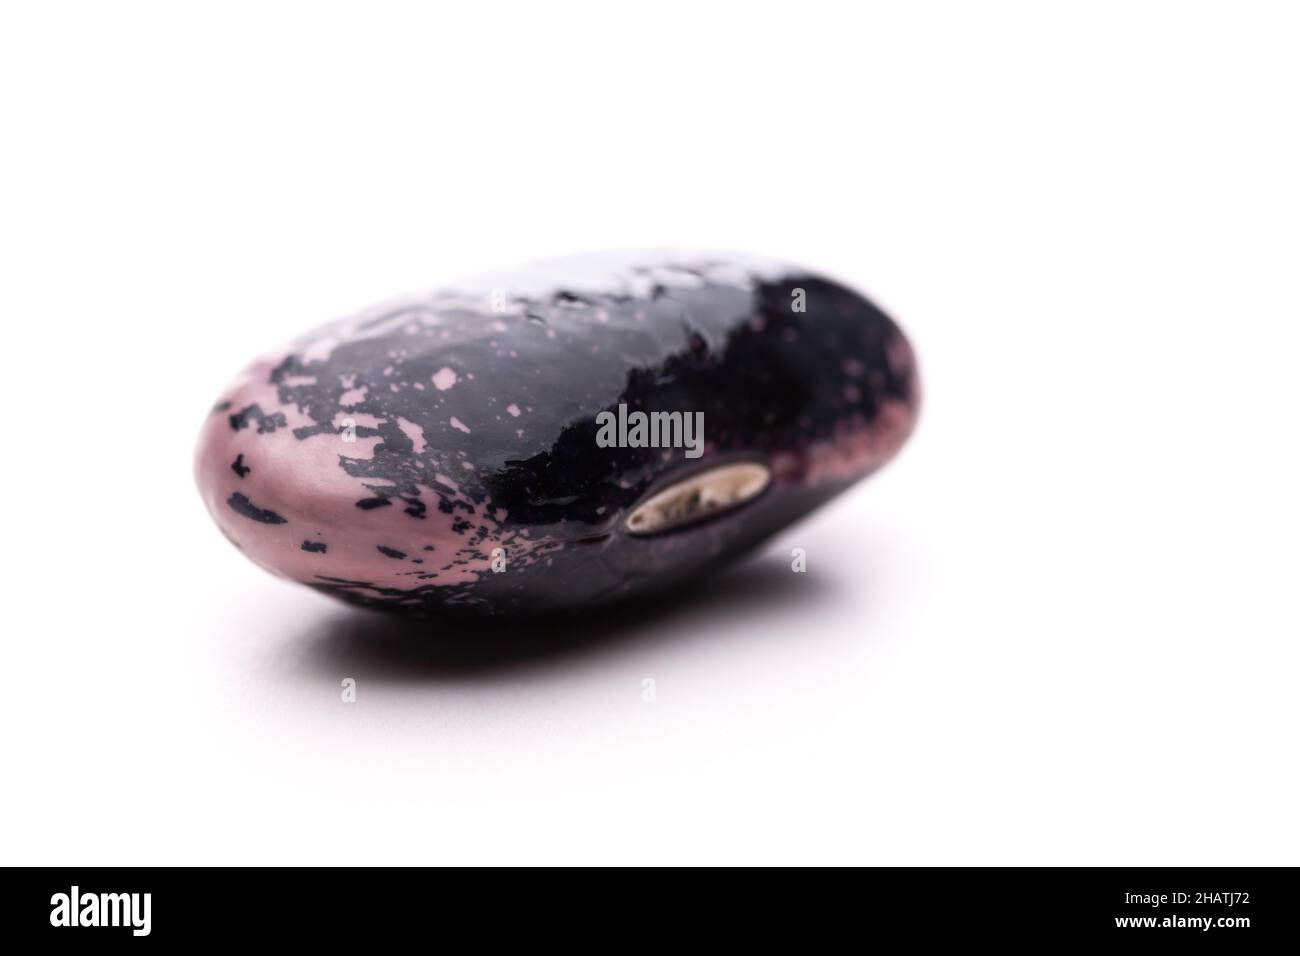 bean, beans, dark, white, background, horizontal, single, alone, one, scarlet runner beans, shell, patterns, foods, carbohydrates, Styria, detail, det Stock Photo